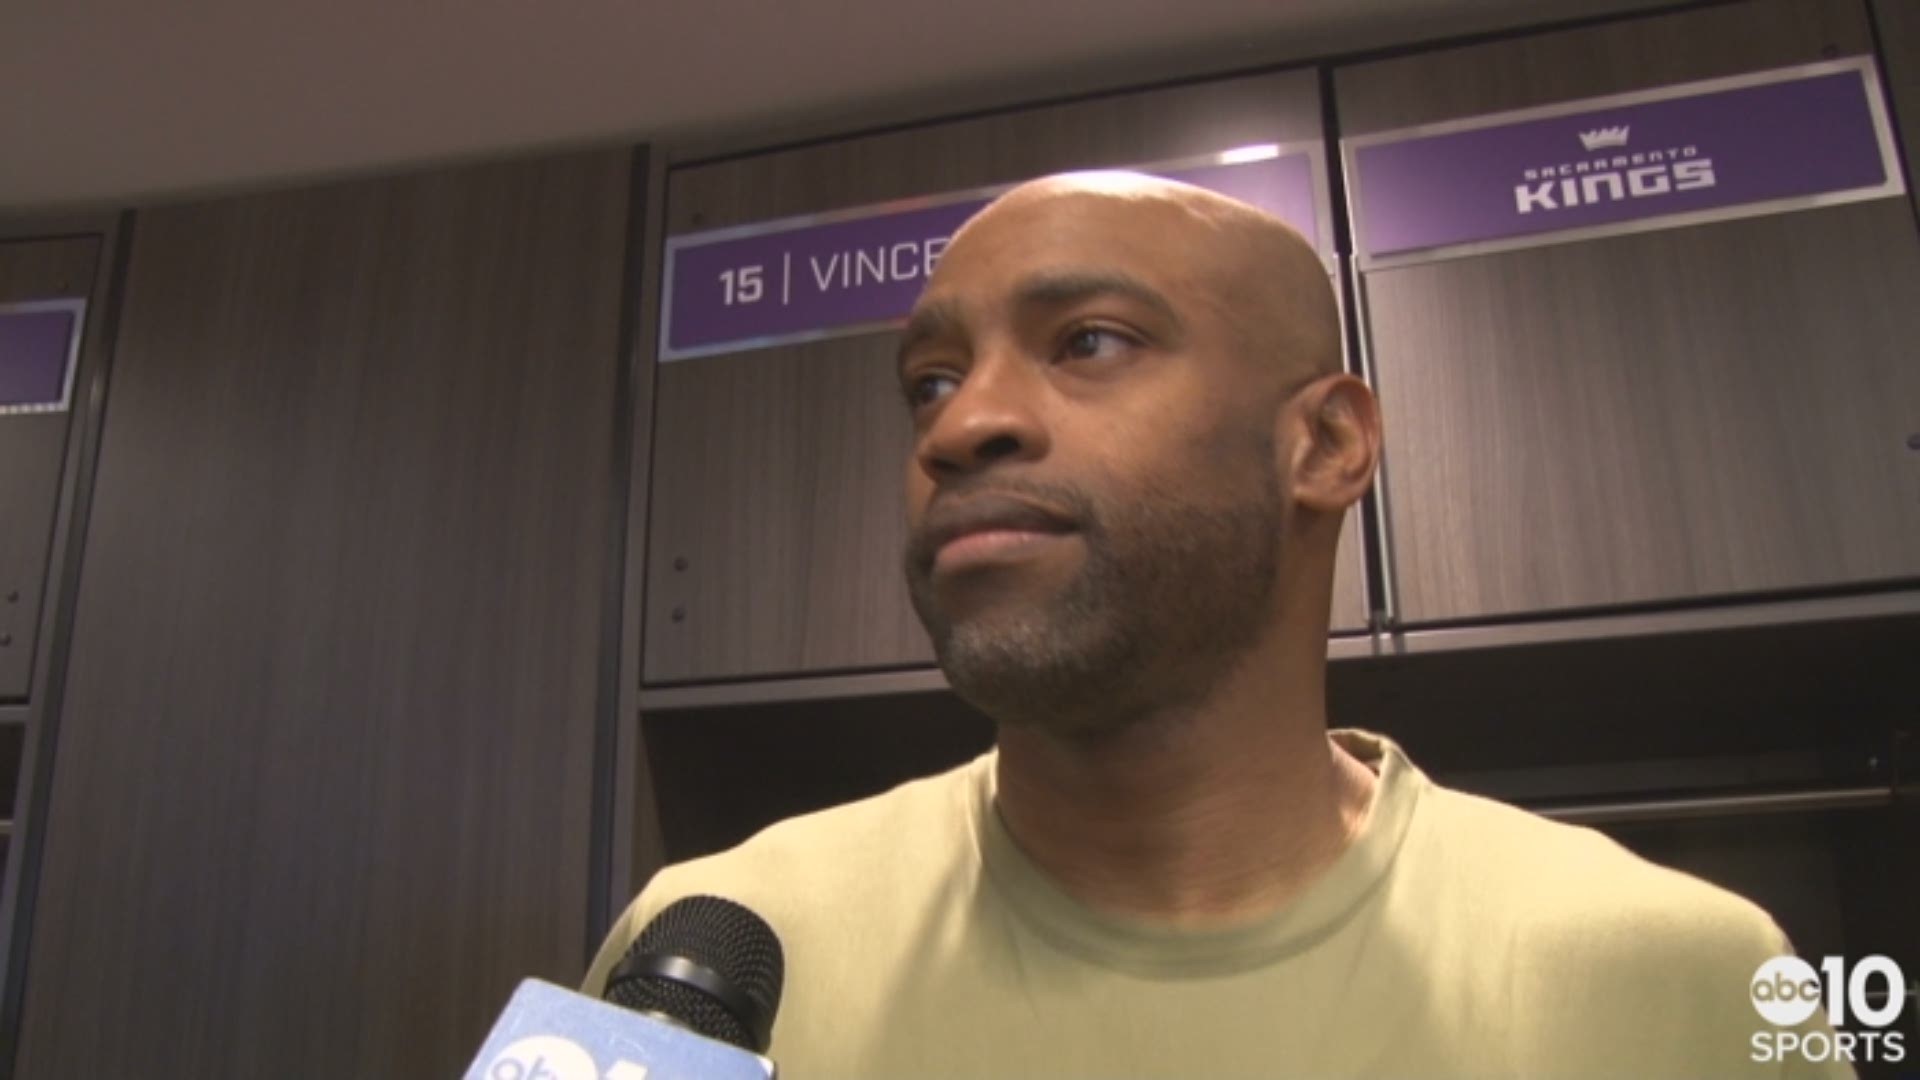 Following the Kings season finale win over the Rockets, Vince Carter reflects on his season with Sacramento, talks about being appreciative of the fans and says he still wants to play his 21st season in the NBA next season.